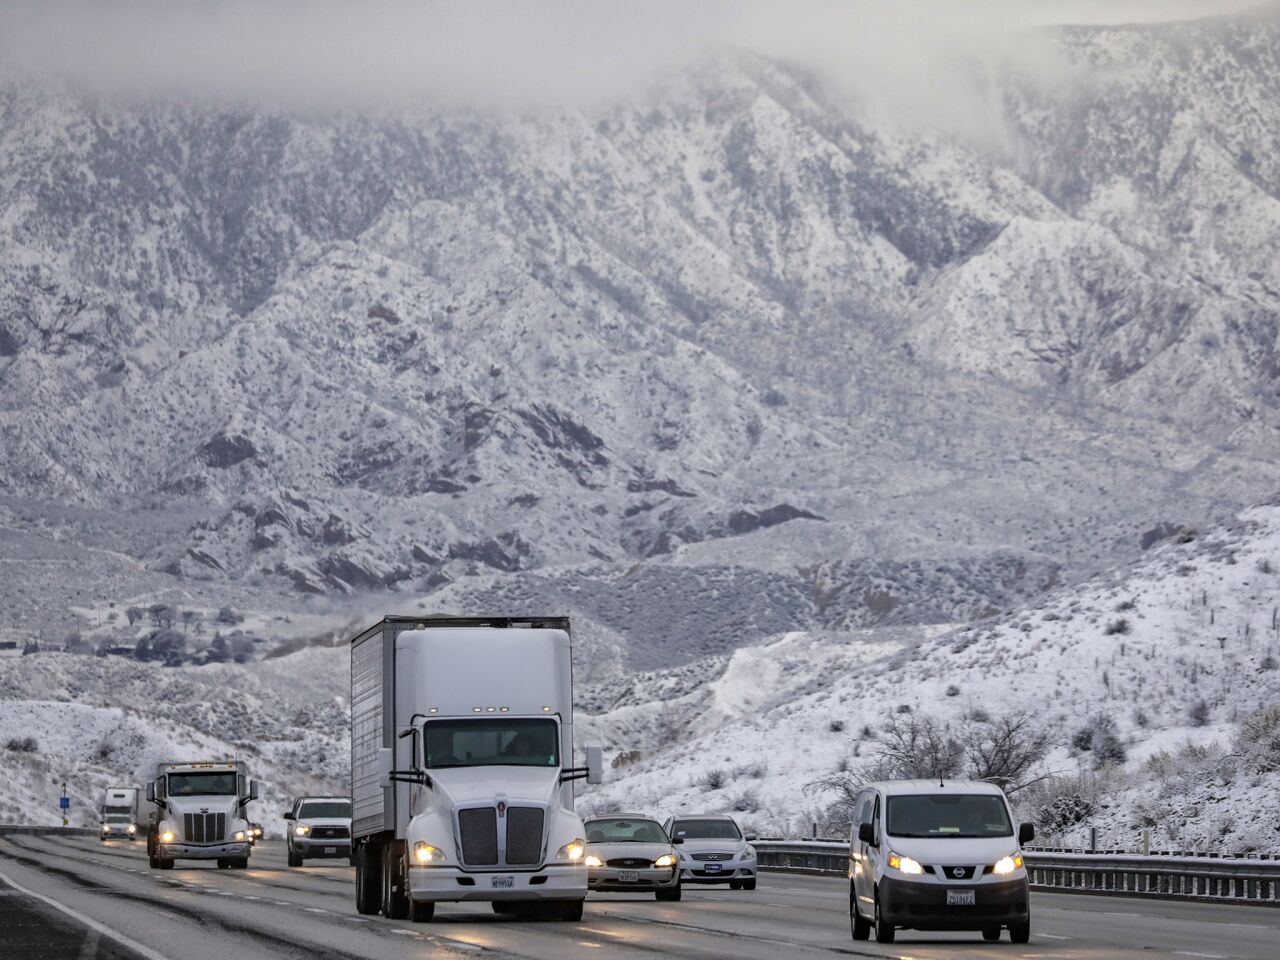 Traffic is running smoothly on Thursday morning through the snow-covered Cajon Pass.